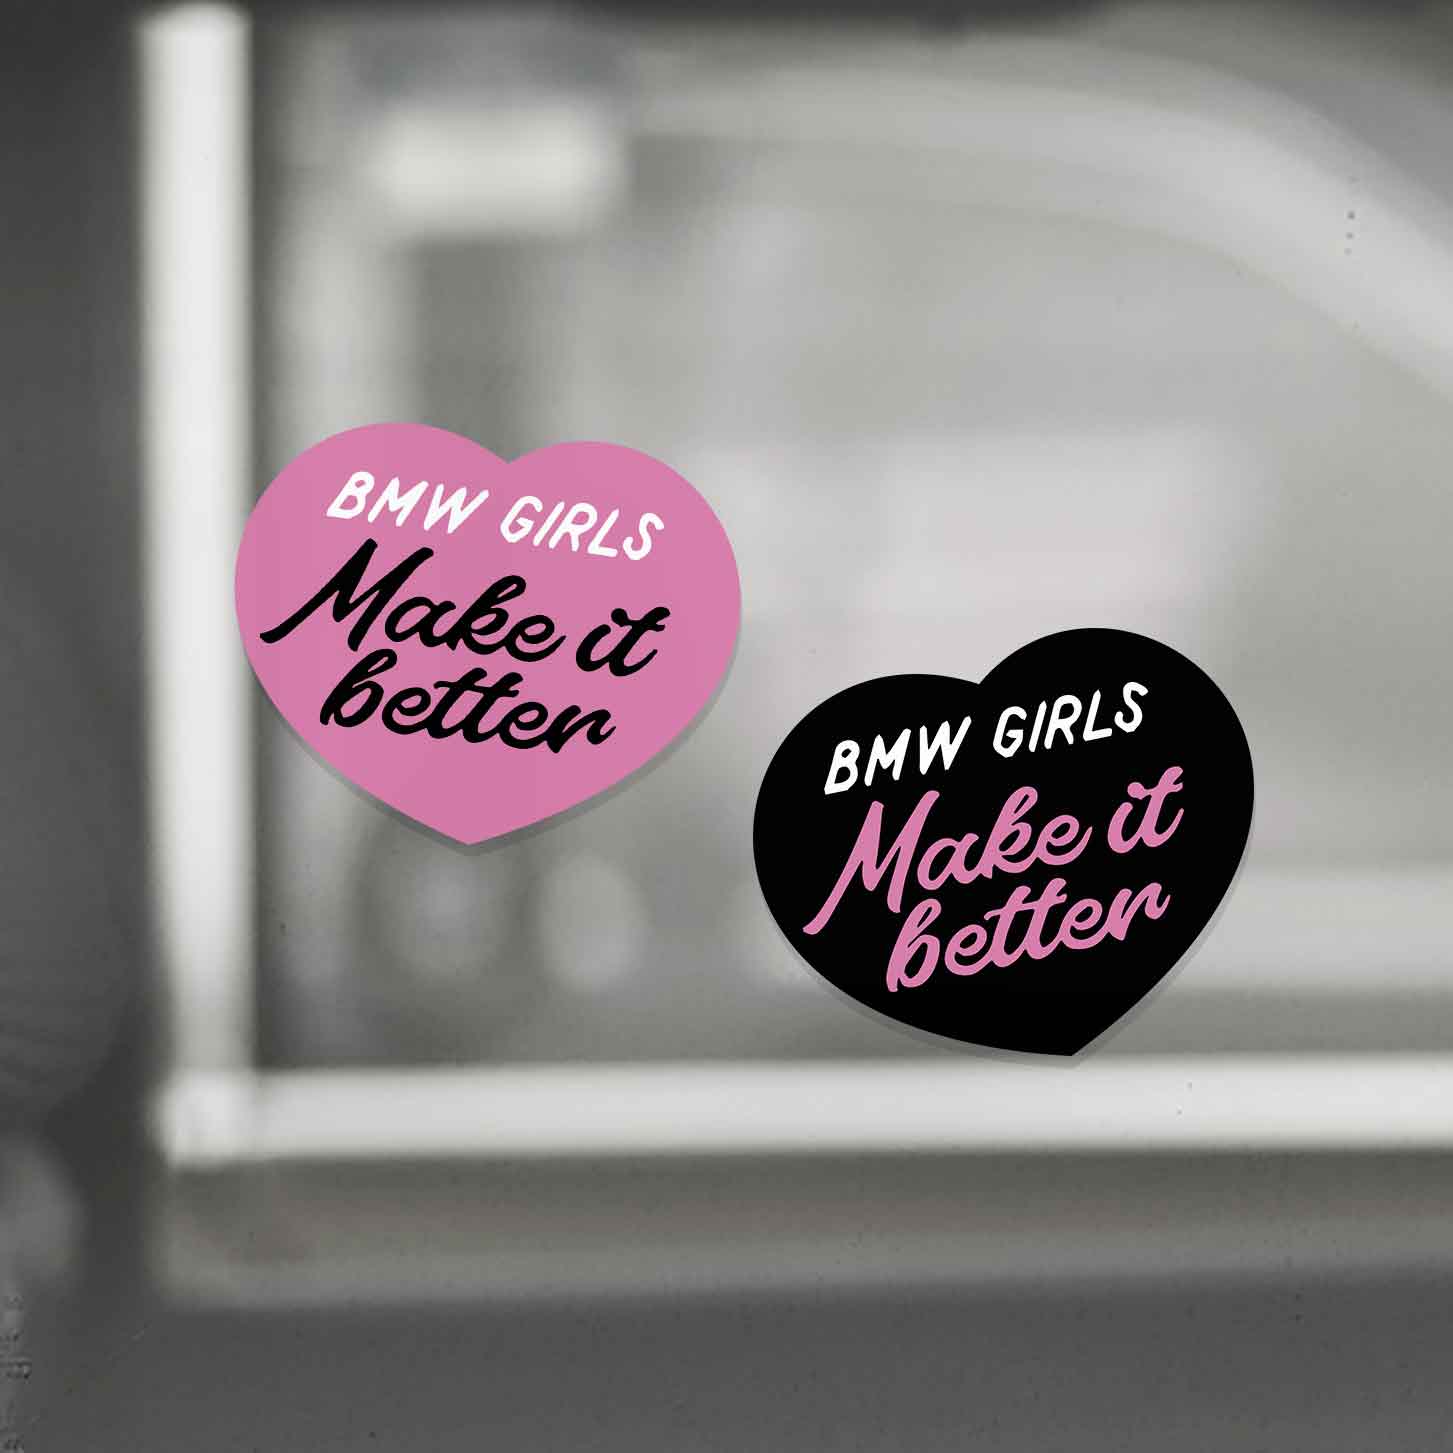 Sticker designed for girls that drive bmw cars or maybe just like them. Made of three premium vinyl sheets. pink, balck and white.